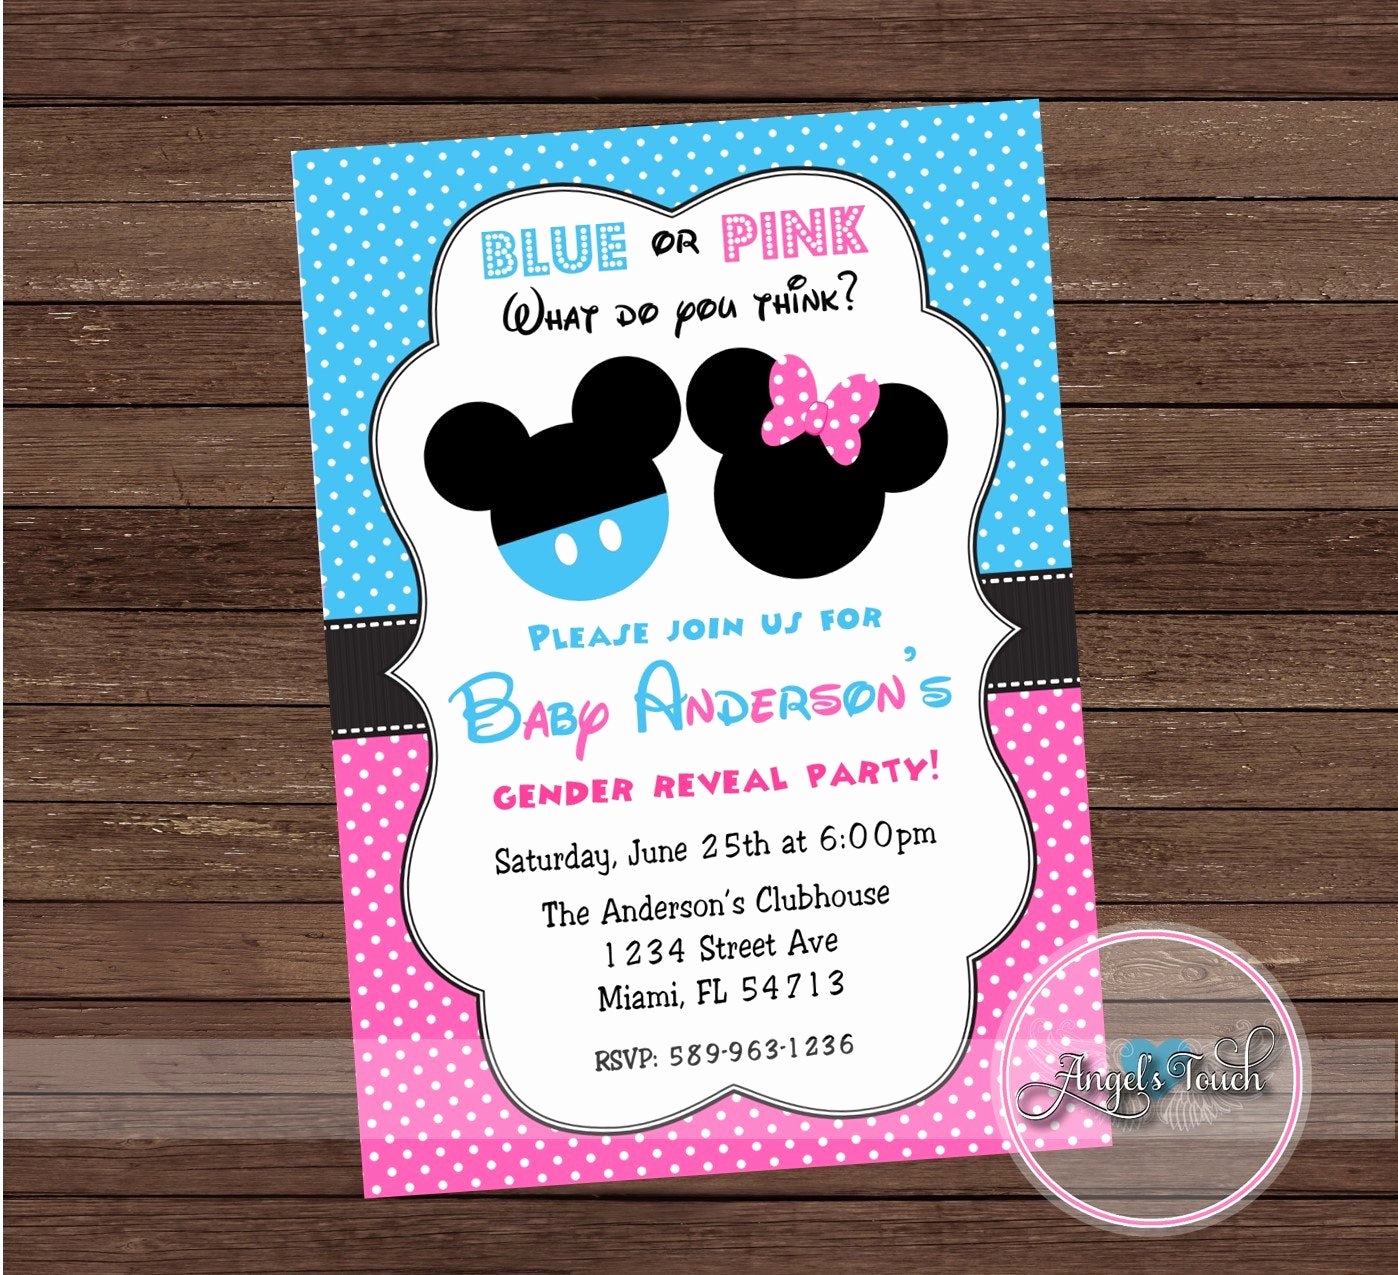 Mickey and Minnie Invitation New Mickey and Minnie Mouse Gender Reveal Party Invitation